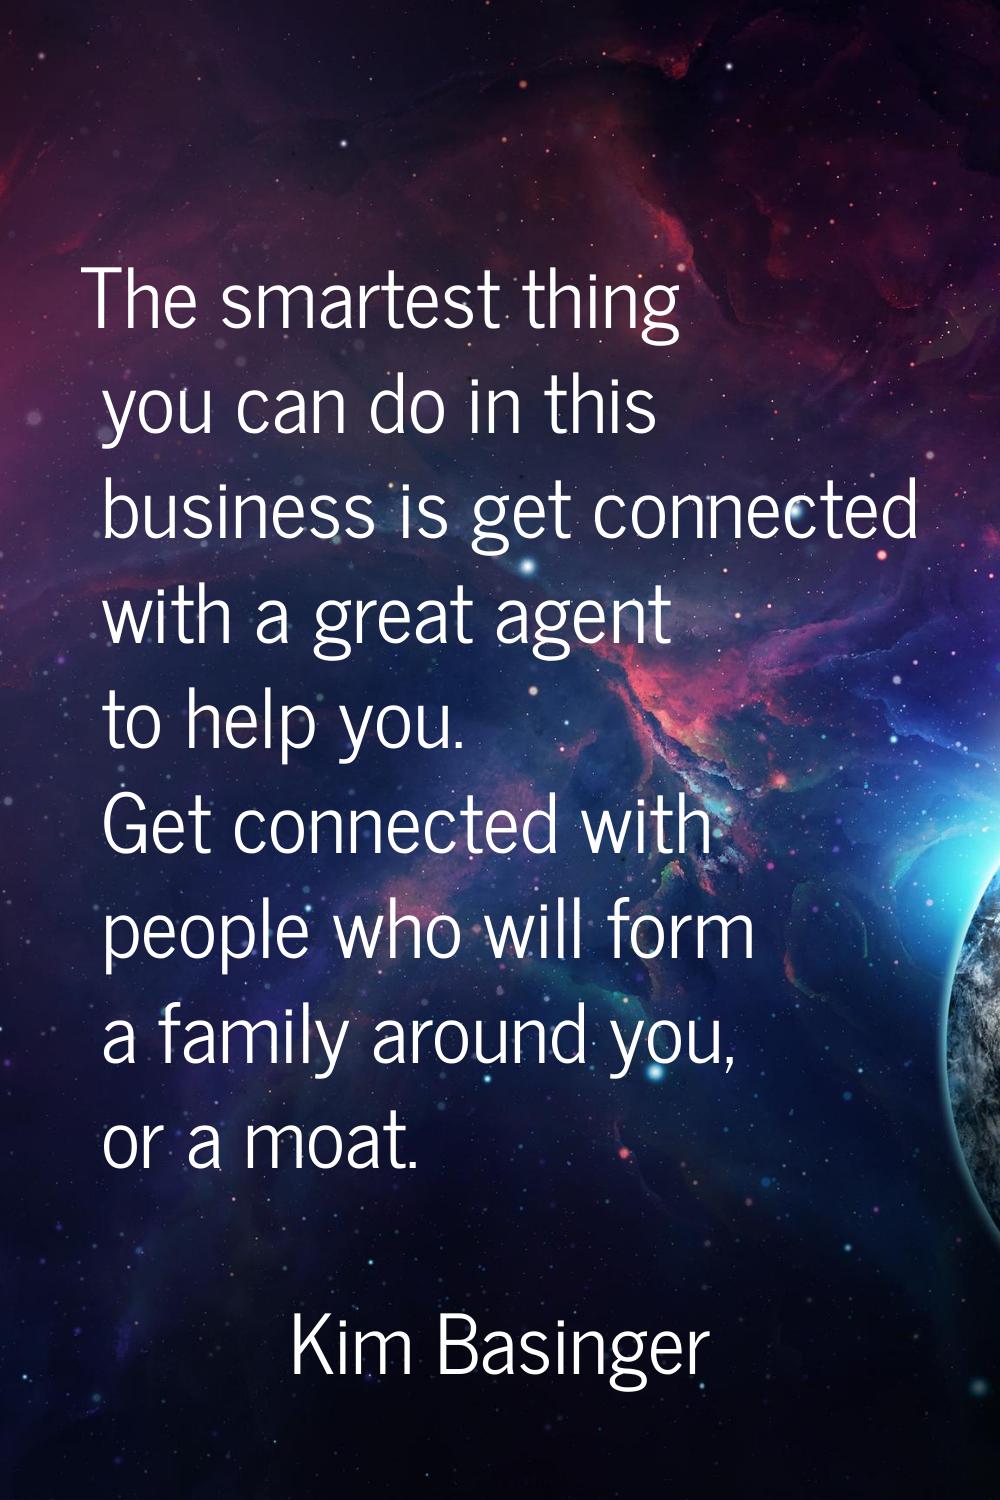 The smartest thing you can do in this business is get connected with a great agent to help you. Get